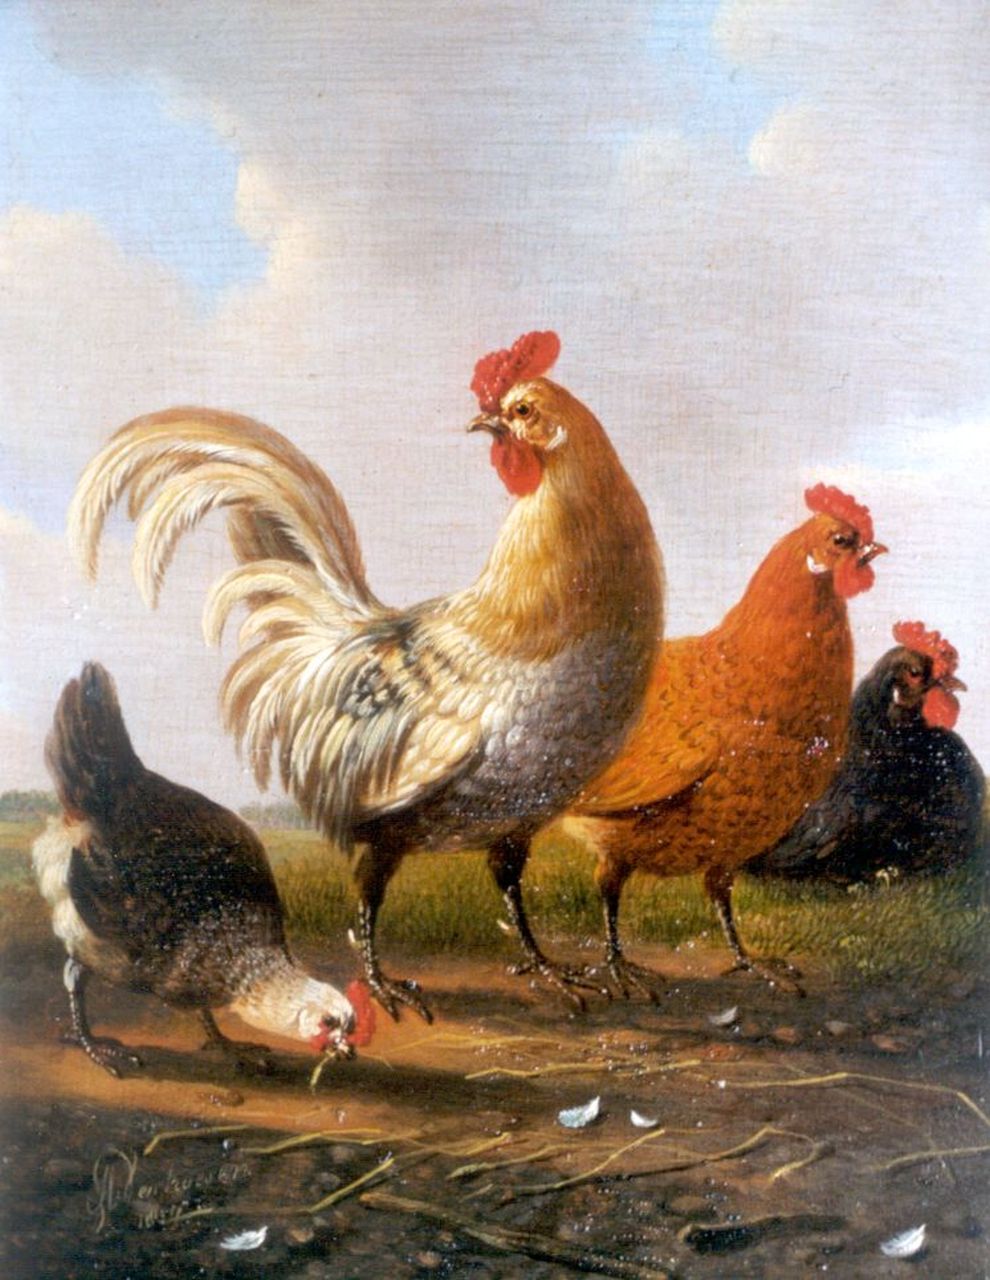 Verhoesen A.  | Albertus Verhoesen, A rooster and chickens, oil on panel 18.0 x 14.5 cm, signed l.l. and dated 1857